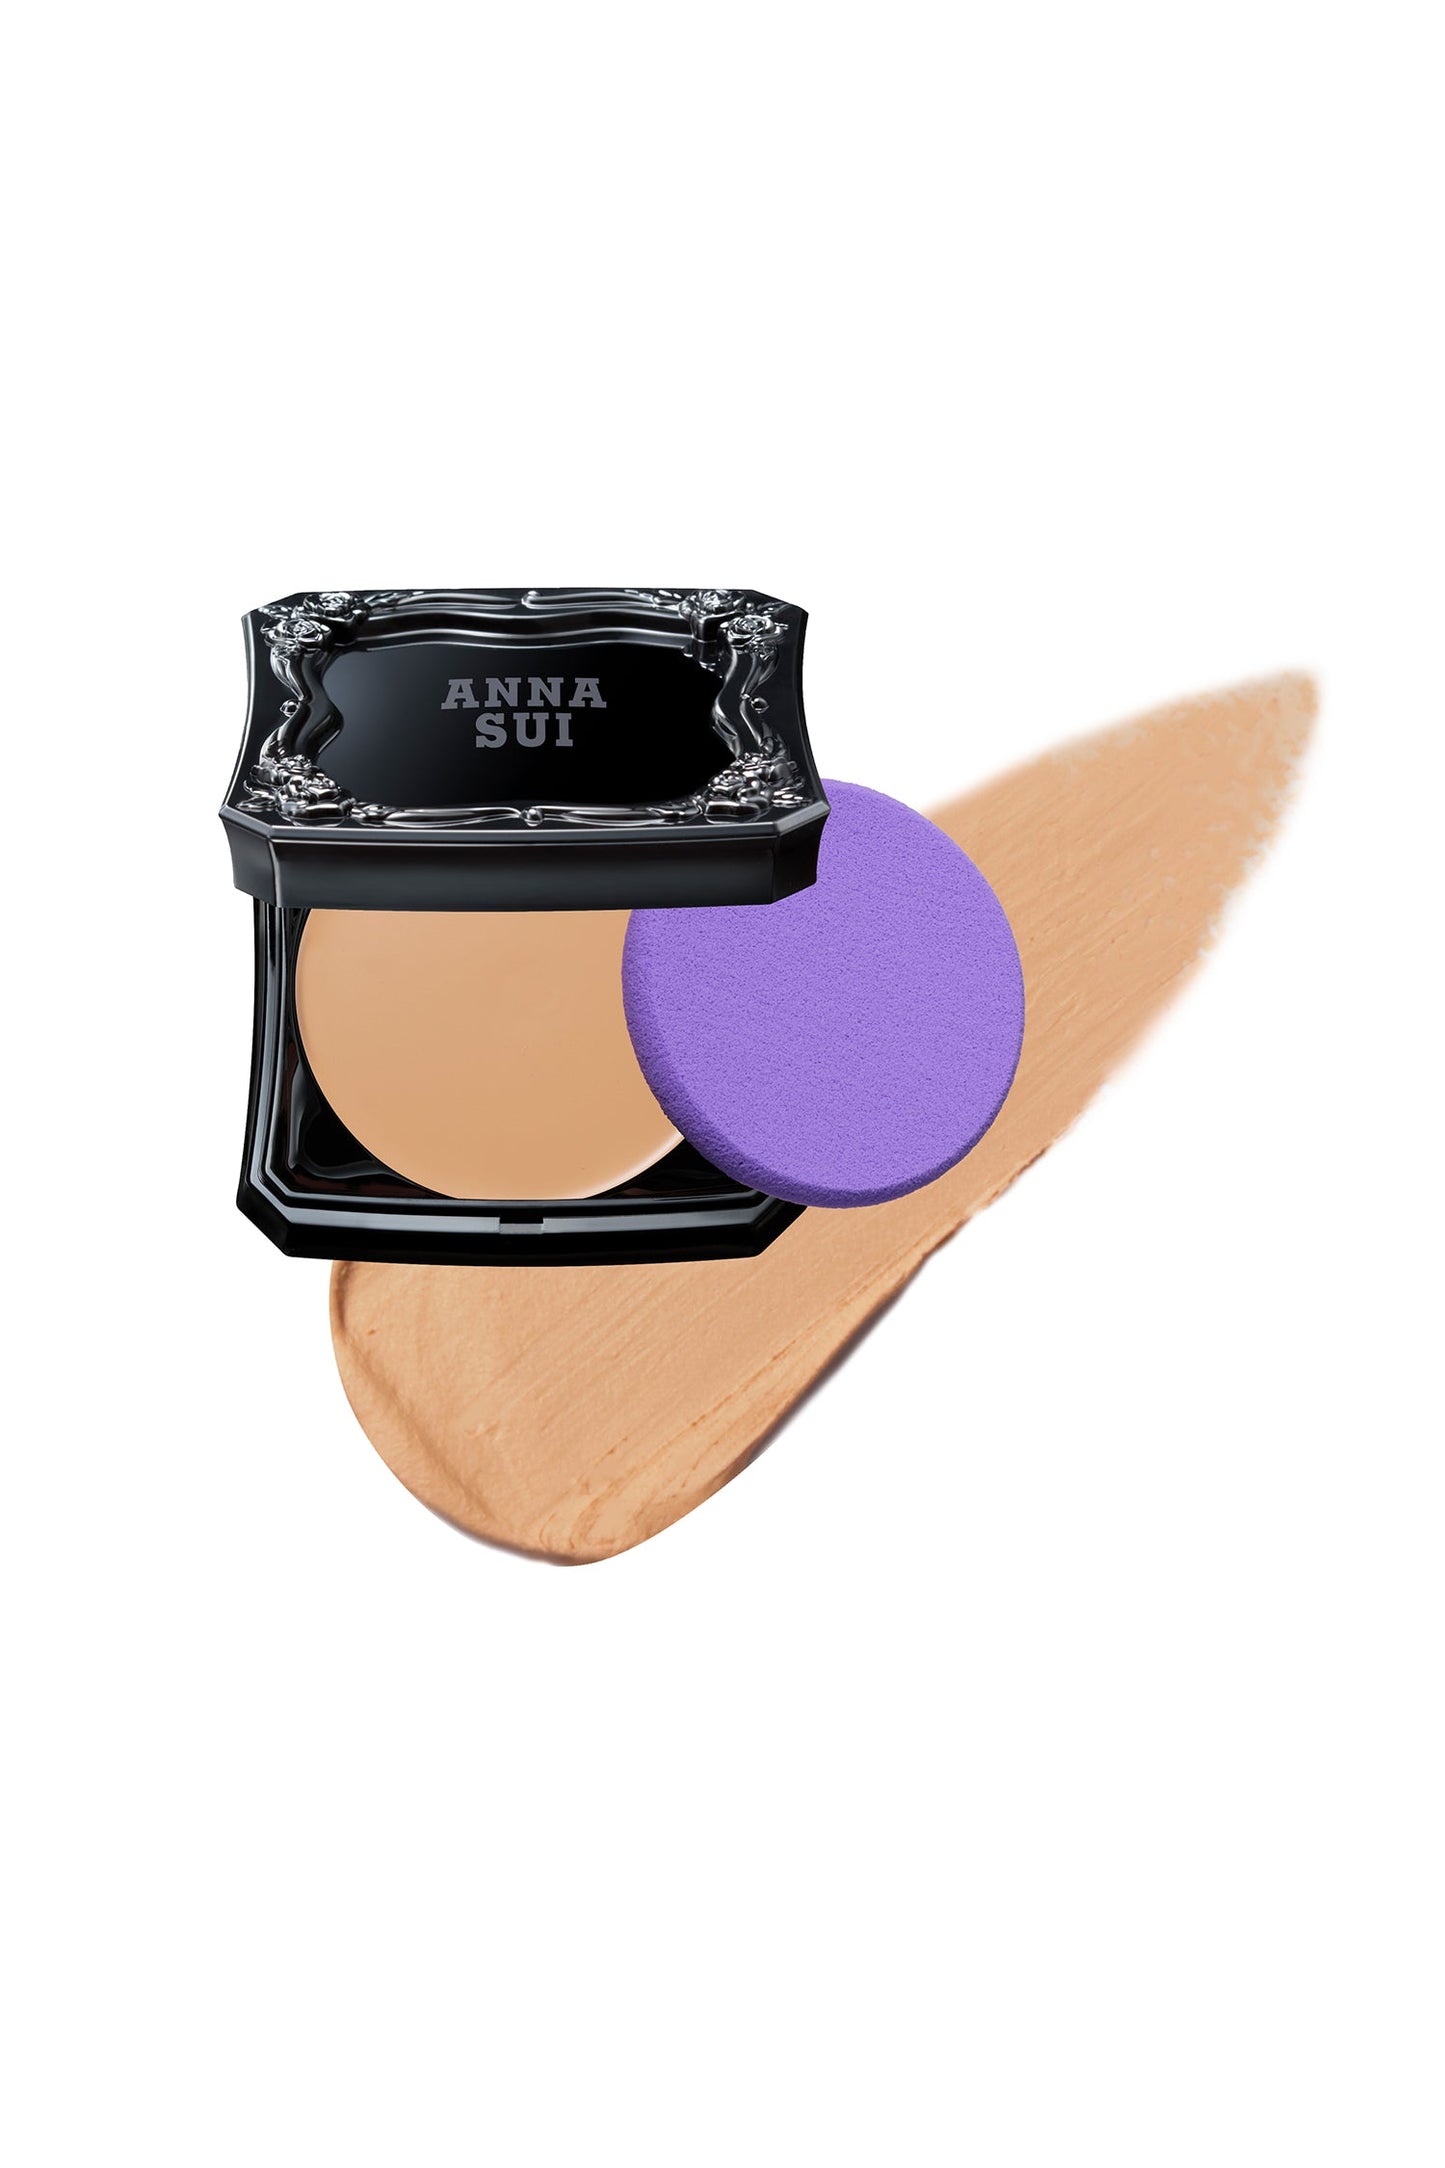 New: Foundation Compact Anna Sui Makeup